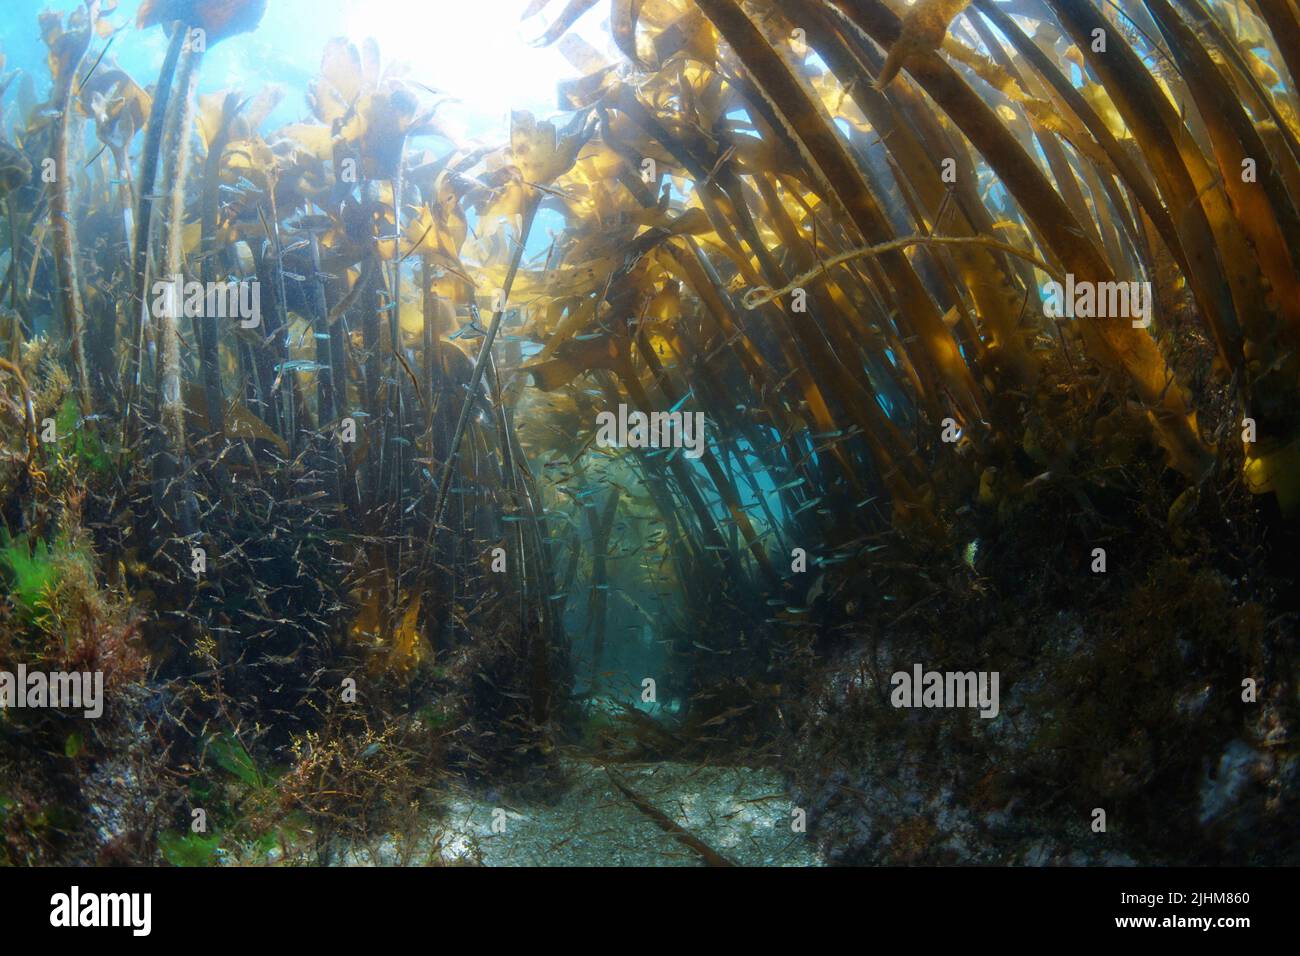 Algae kelp forest underwater in the Atlantic ocean with small fish and shrimp (Furbellow seaweed, Saccorhiza polyschides), Spain, Galicia Stock Photo